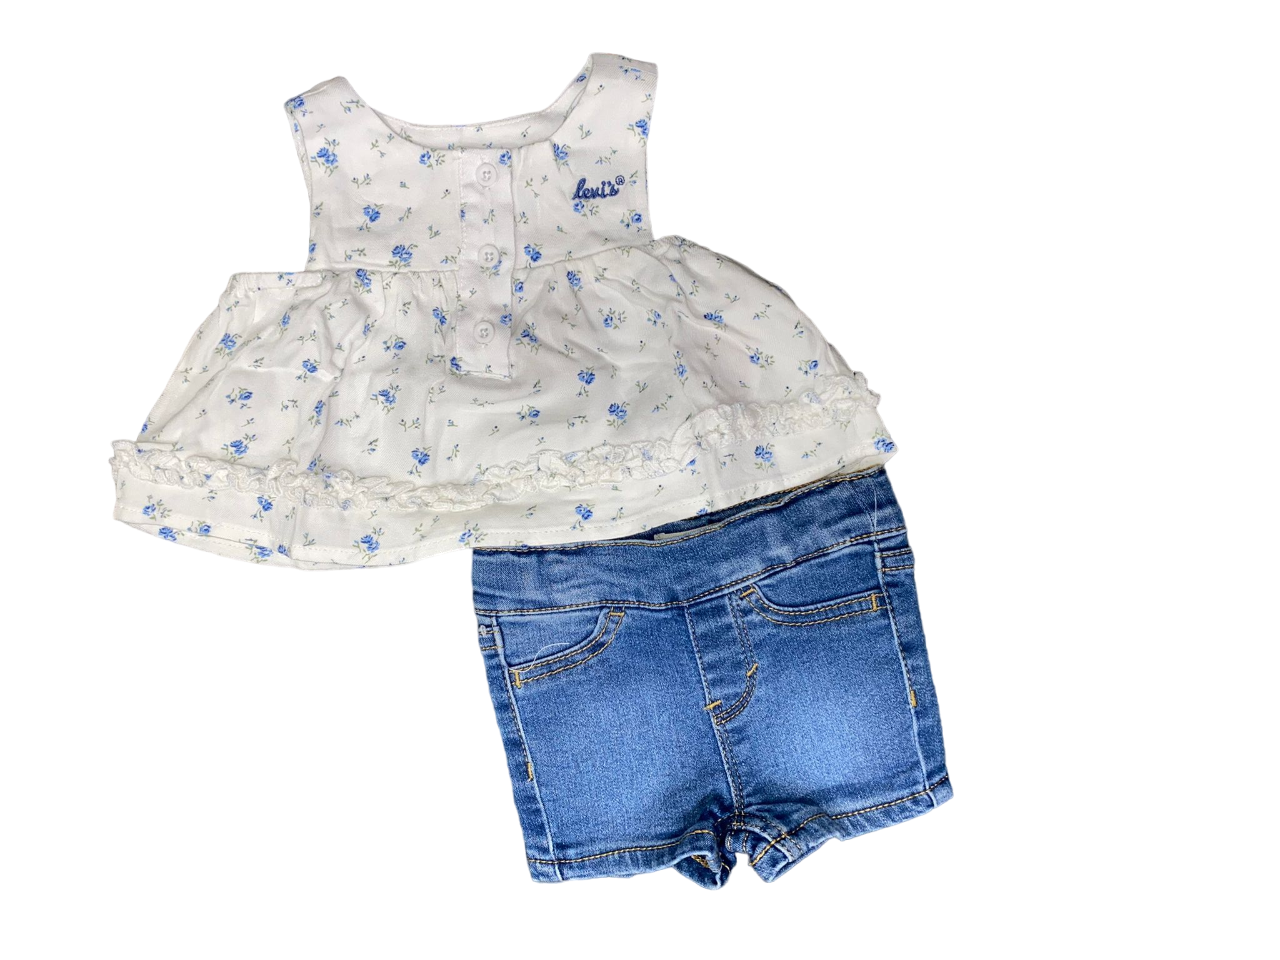 Levi&#39;s children&#39;s outfit with denim shorts and tank top 1EH109 W51 white alyssum